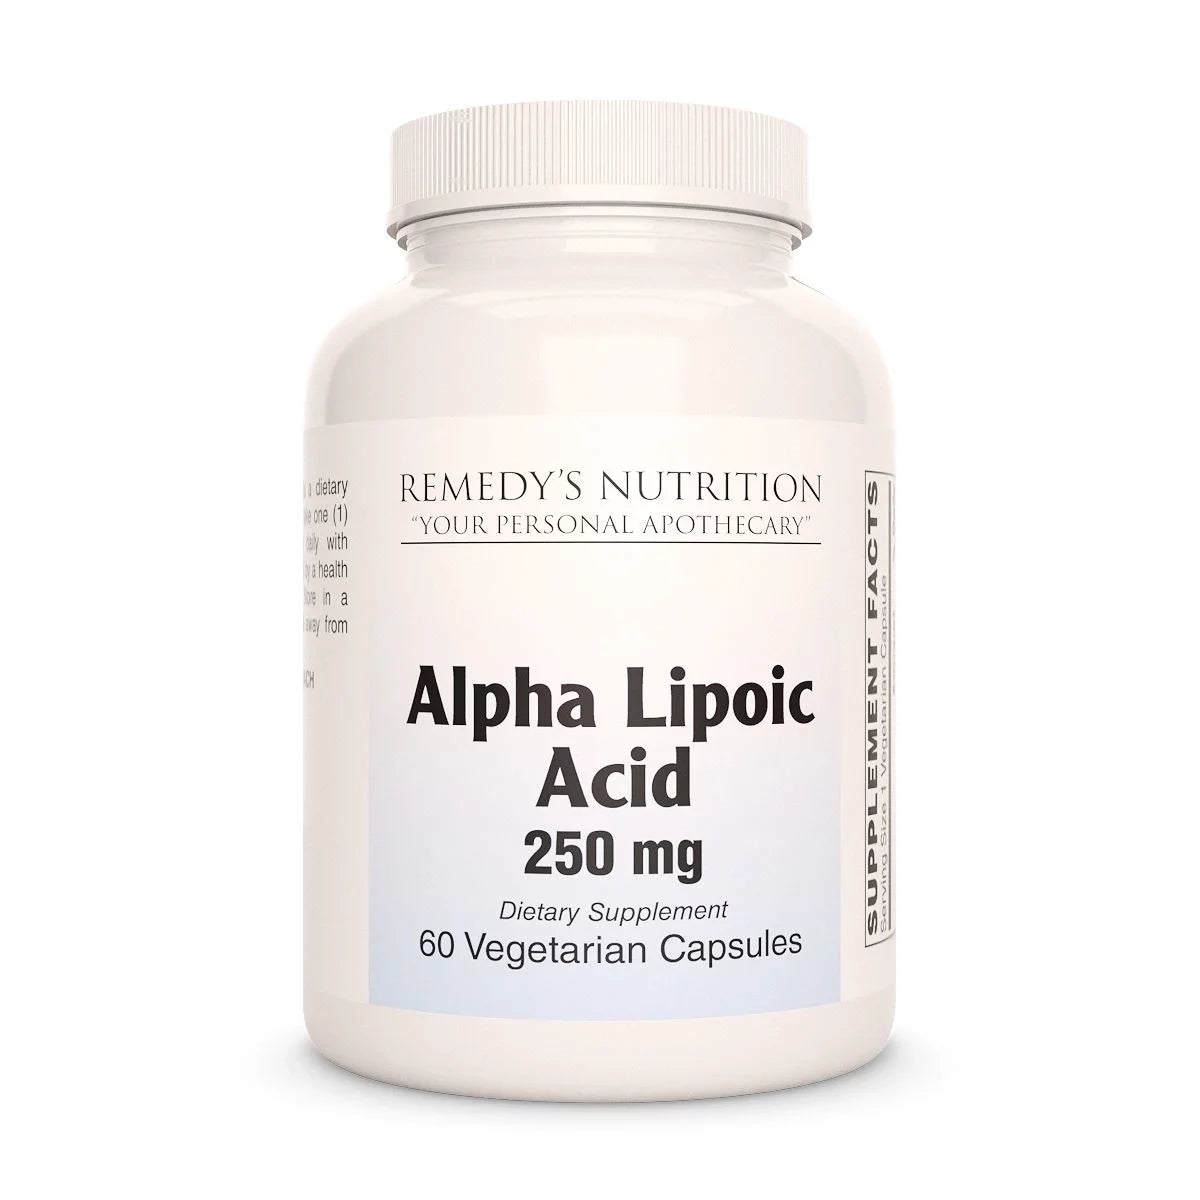 Image of Remedy's Nutrition® Alpha Lipoic Acid front bottle Dietary Supplement. 